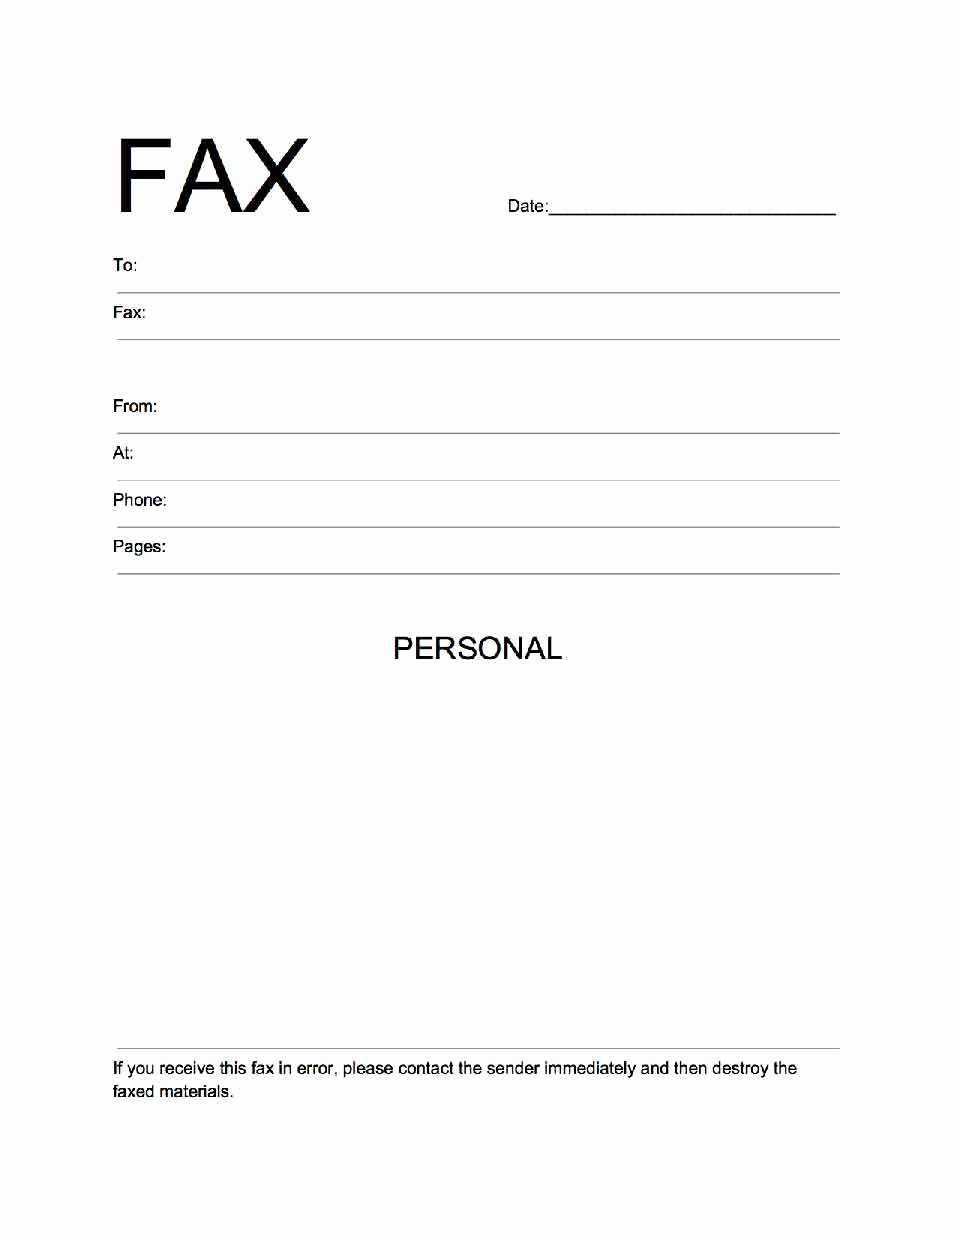 Free Fax Cover Sheets Template Beautiful Free Fax Cover Sheet Template Download